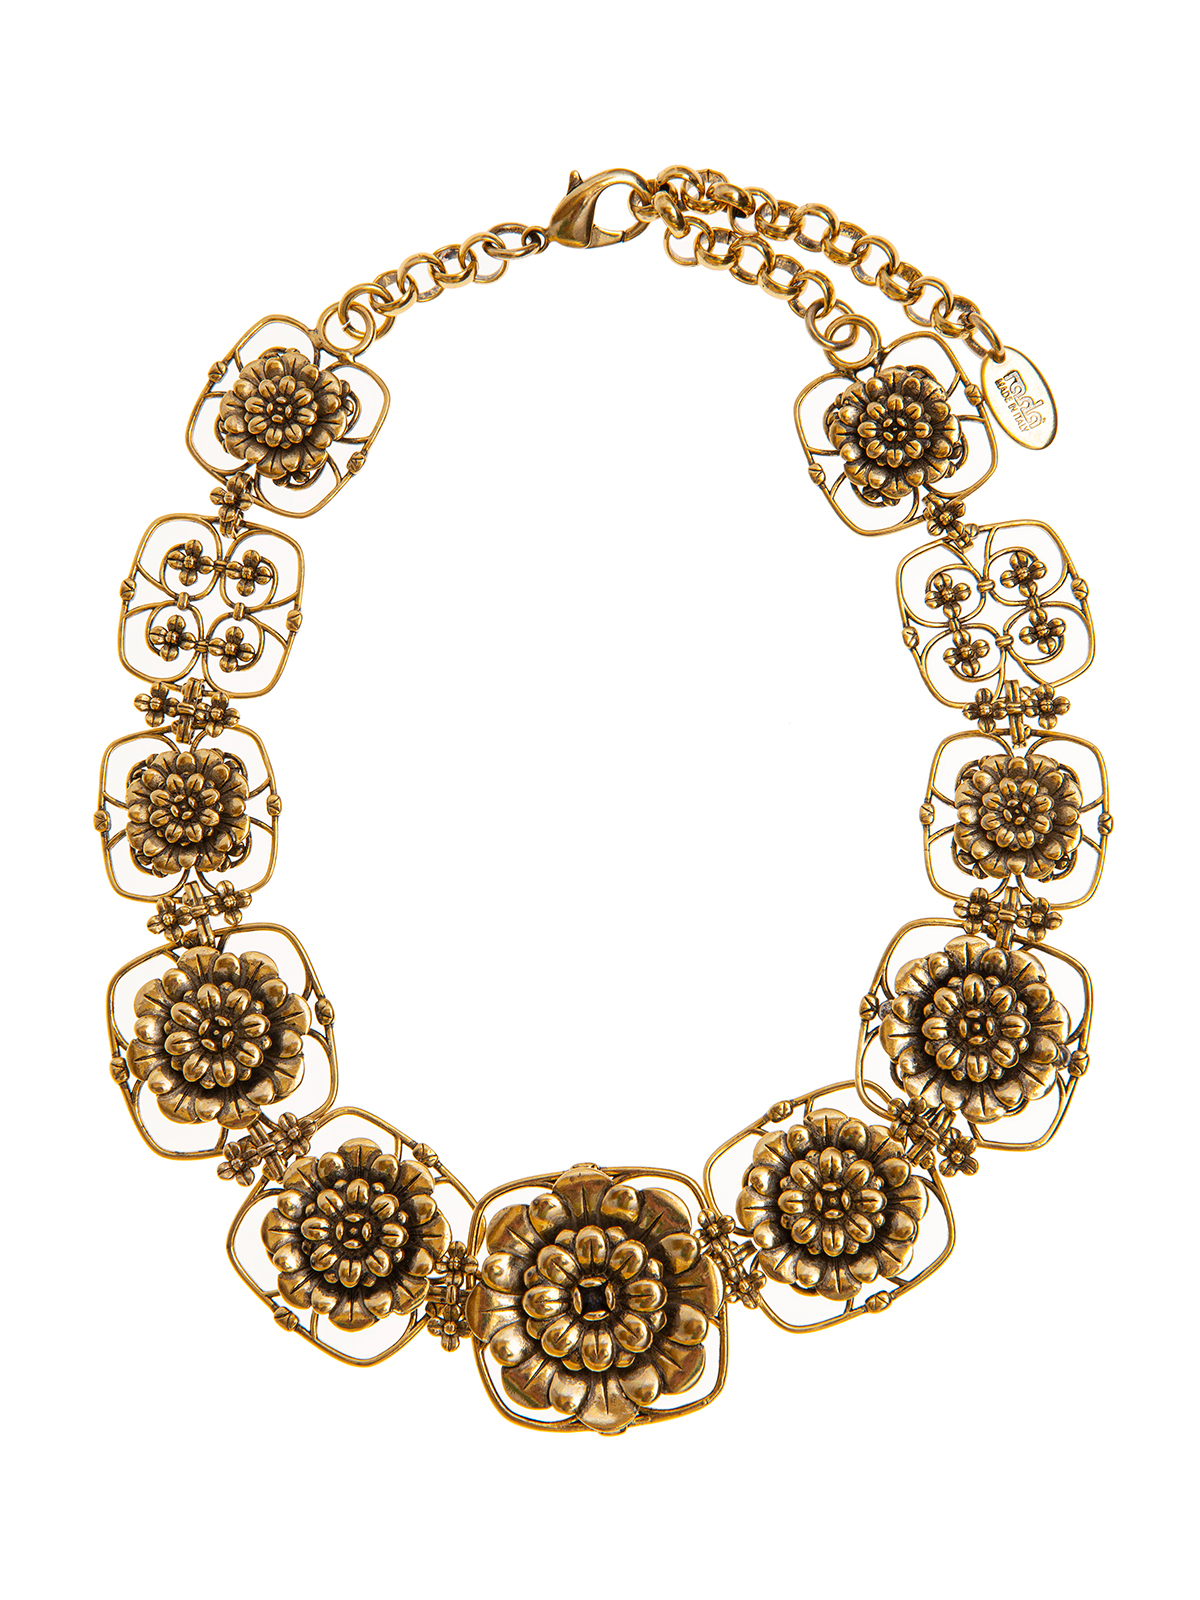 Filigree necklace with metal flowers